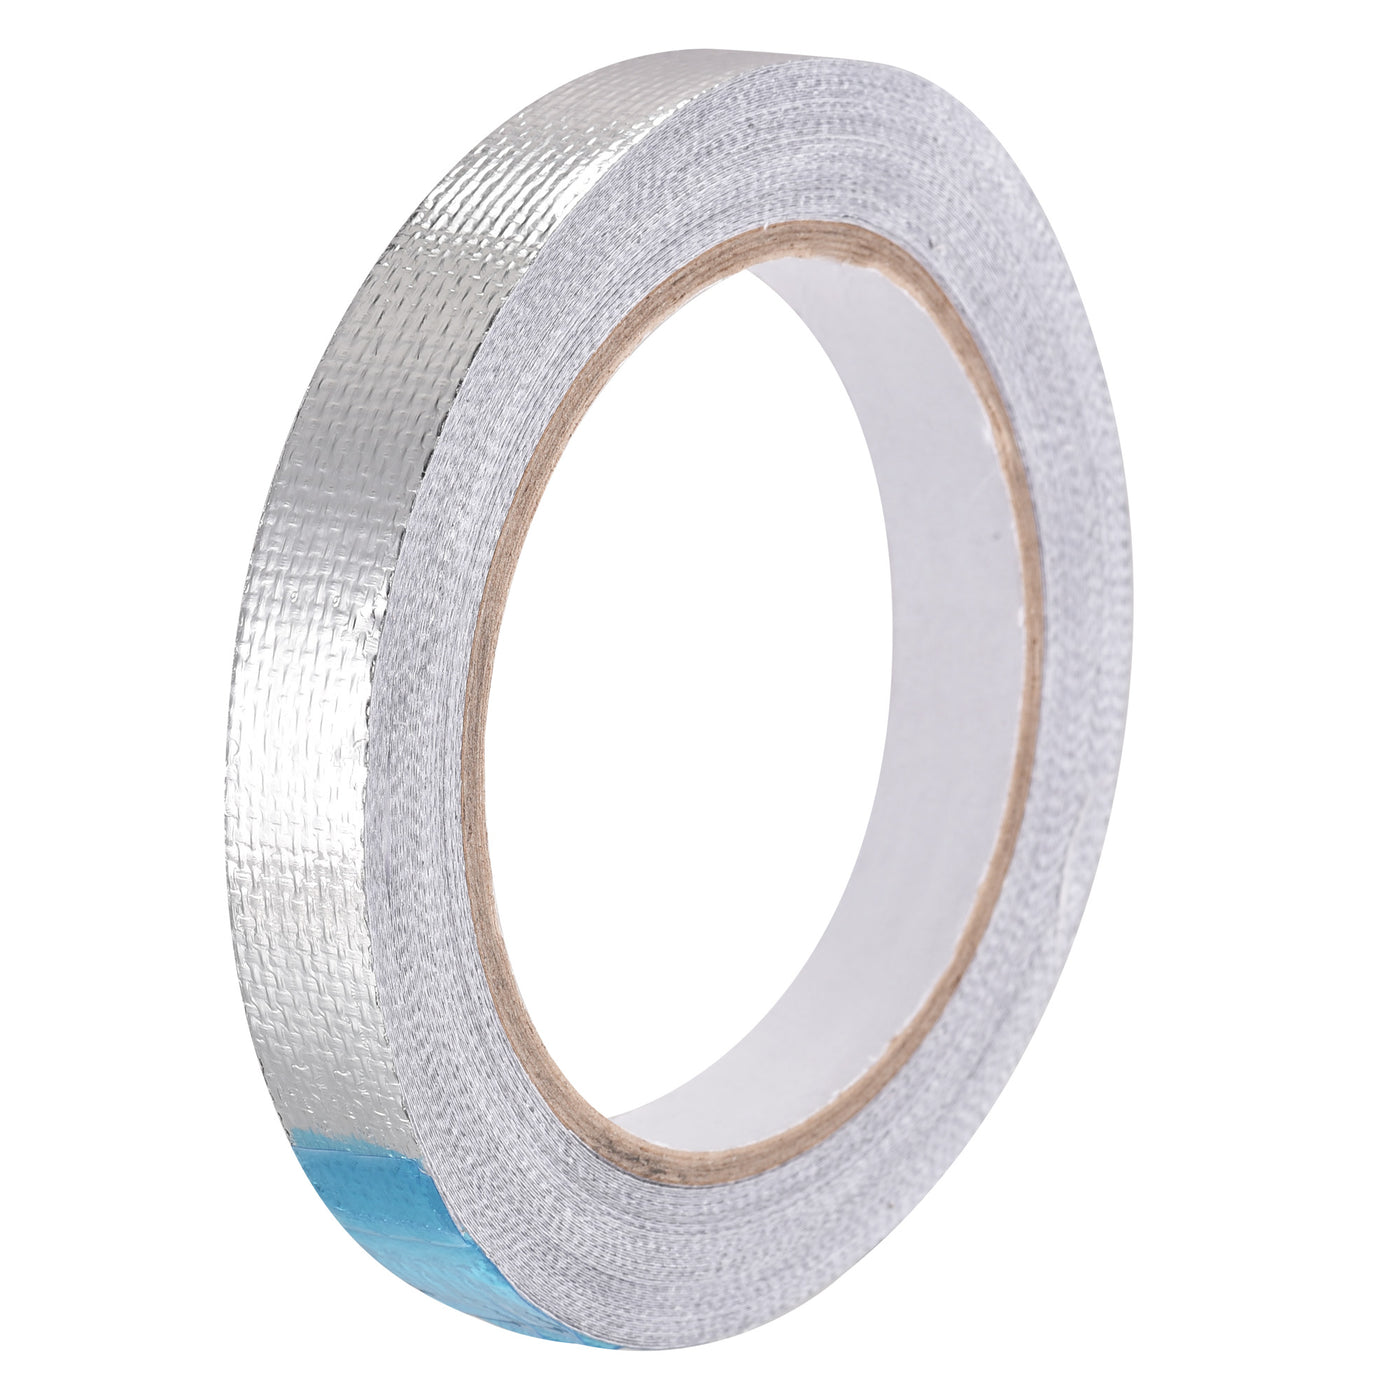 uxcell Uxcell Aluminum Foil Tape High-Temperature Tape for HVAC,Sealing 15mmx20m/65ft